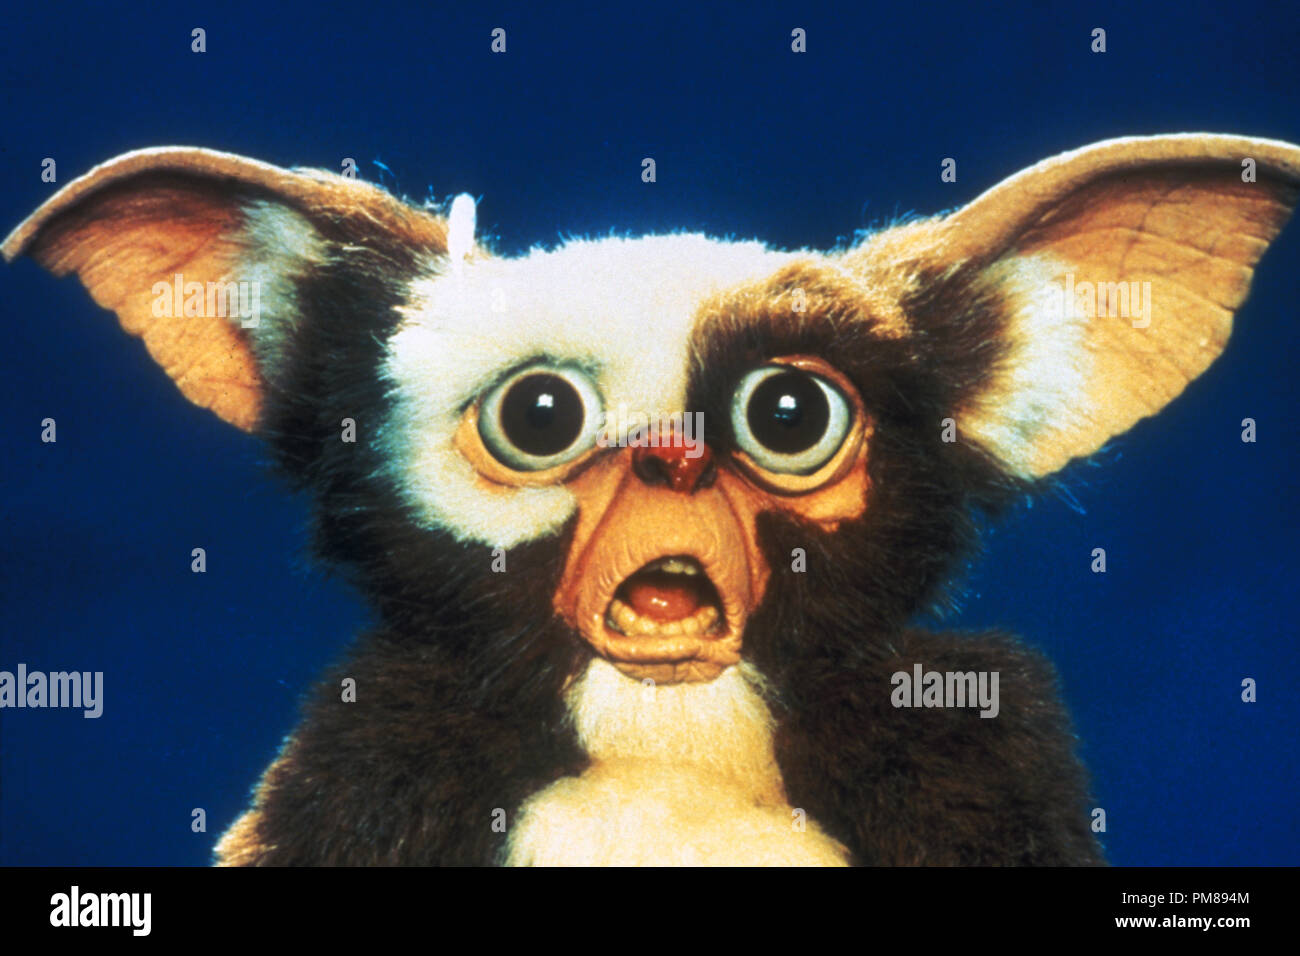 Studio Publicity Still from 'Gremlins' Gizmo (Gremlin)  © 1984 Warner  All Rights Reserved   File Reference # 31706314THA  For Editorial Use Only Stock Photo